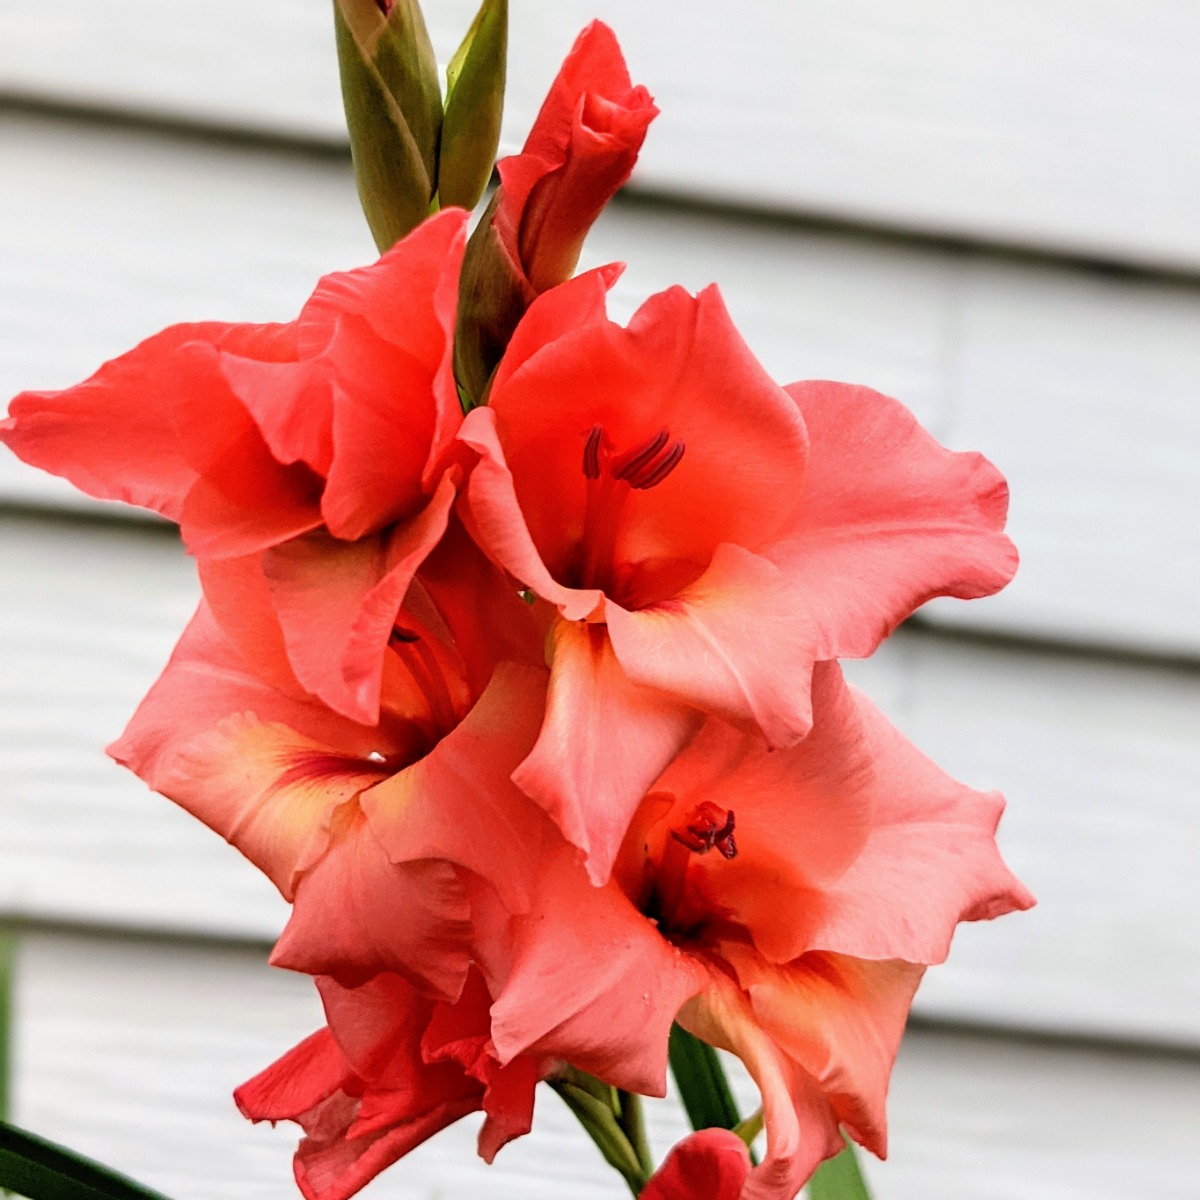 Gorgeous coral gladiolus flower in our 2021 garden